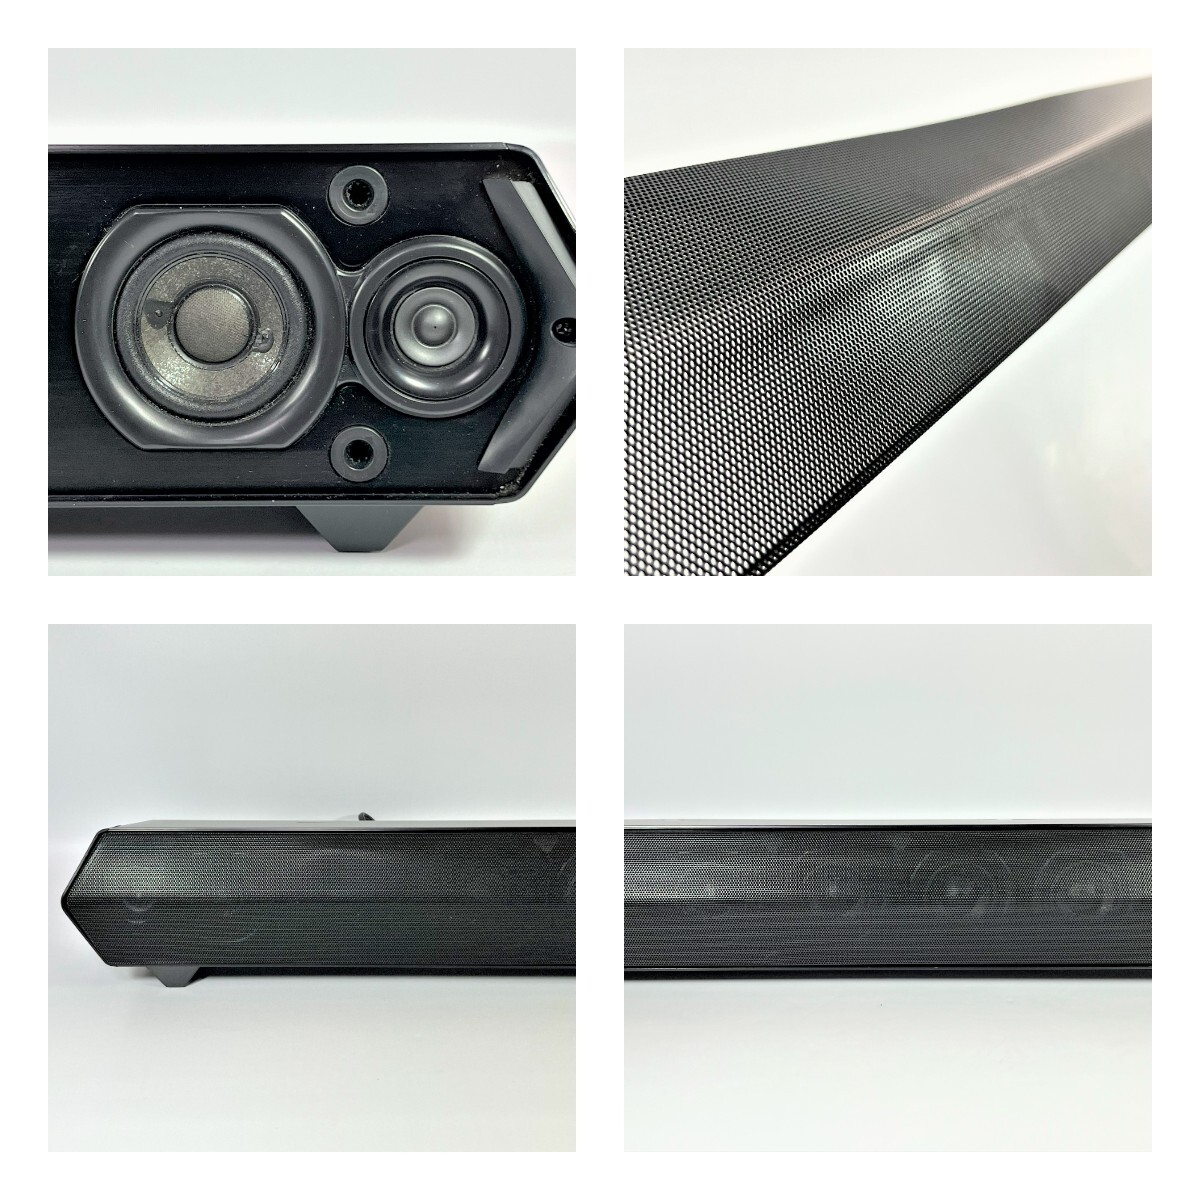 SONY Sony HT-ST5 SA-ST5 SA-WST5 sound bar subwoofer speaker 2014 year made *R601183